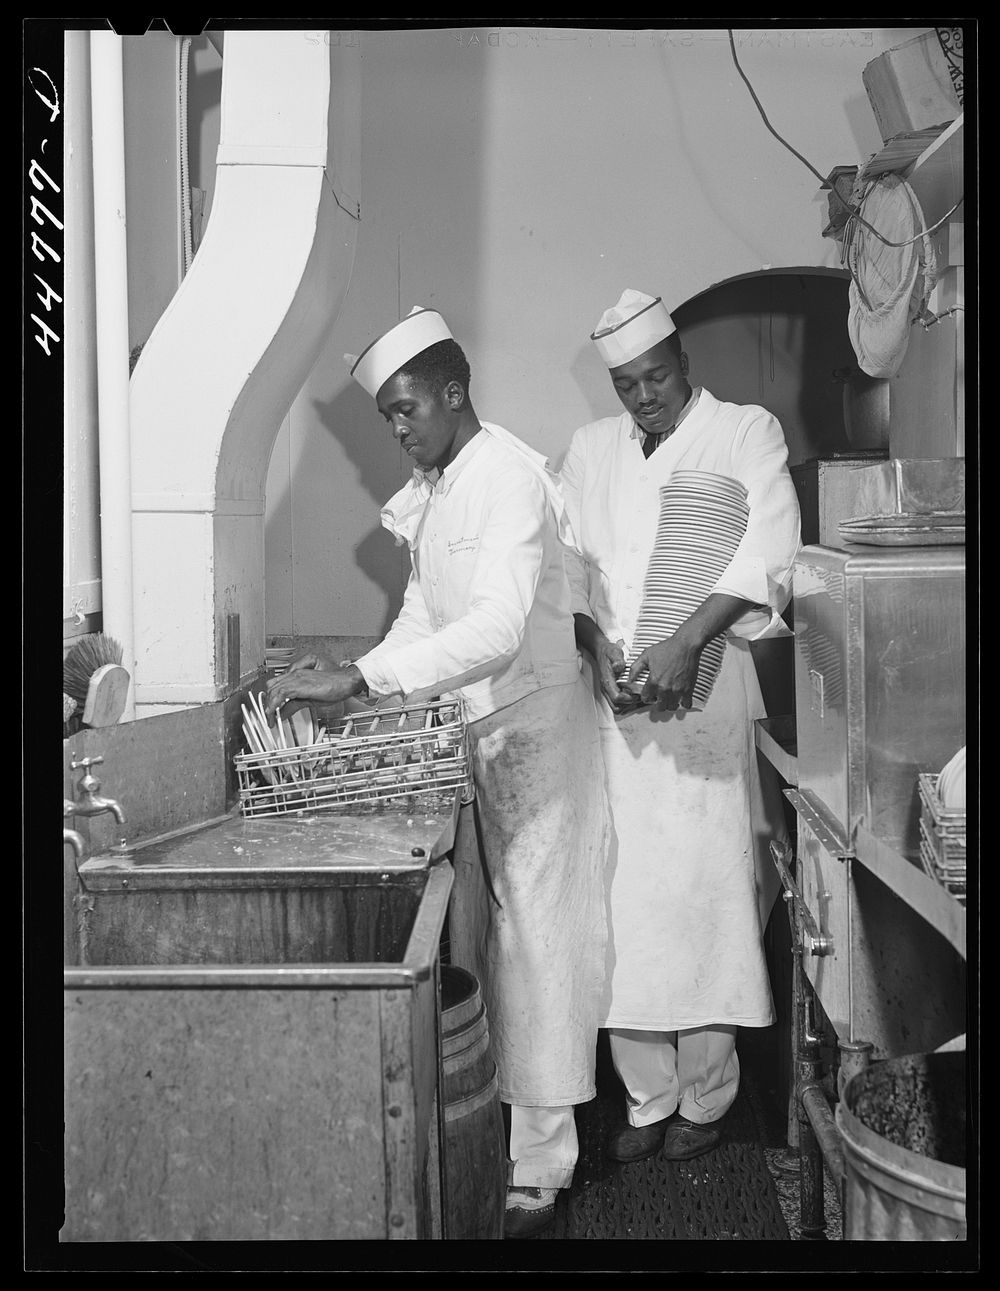  dishwasher. Investment Pharmacy, Washington, D.C.. Sourced from the Library of Congress.